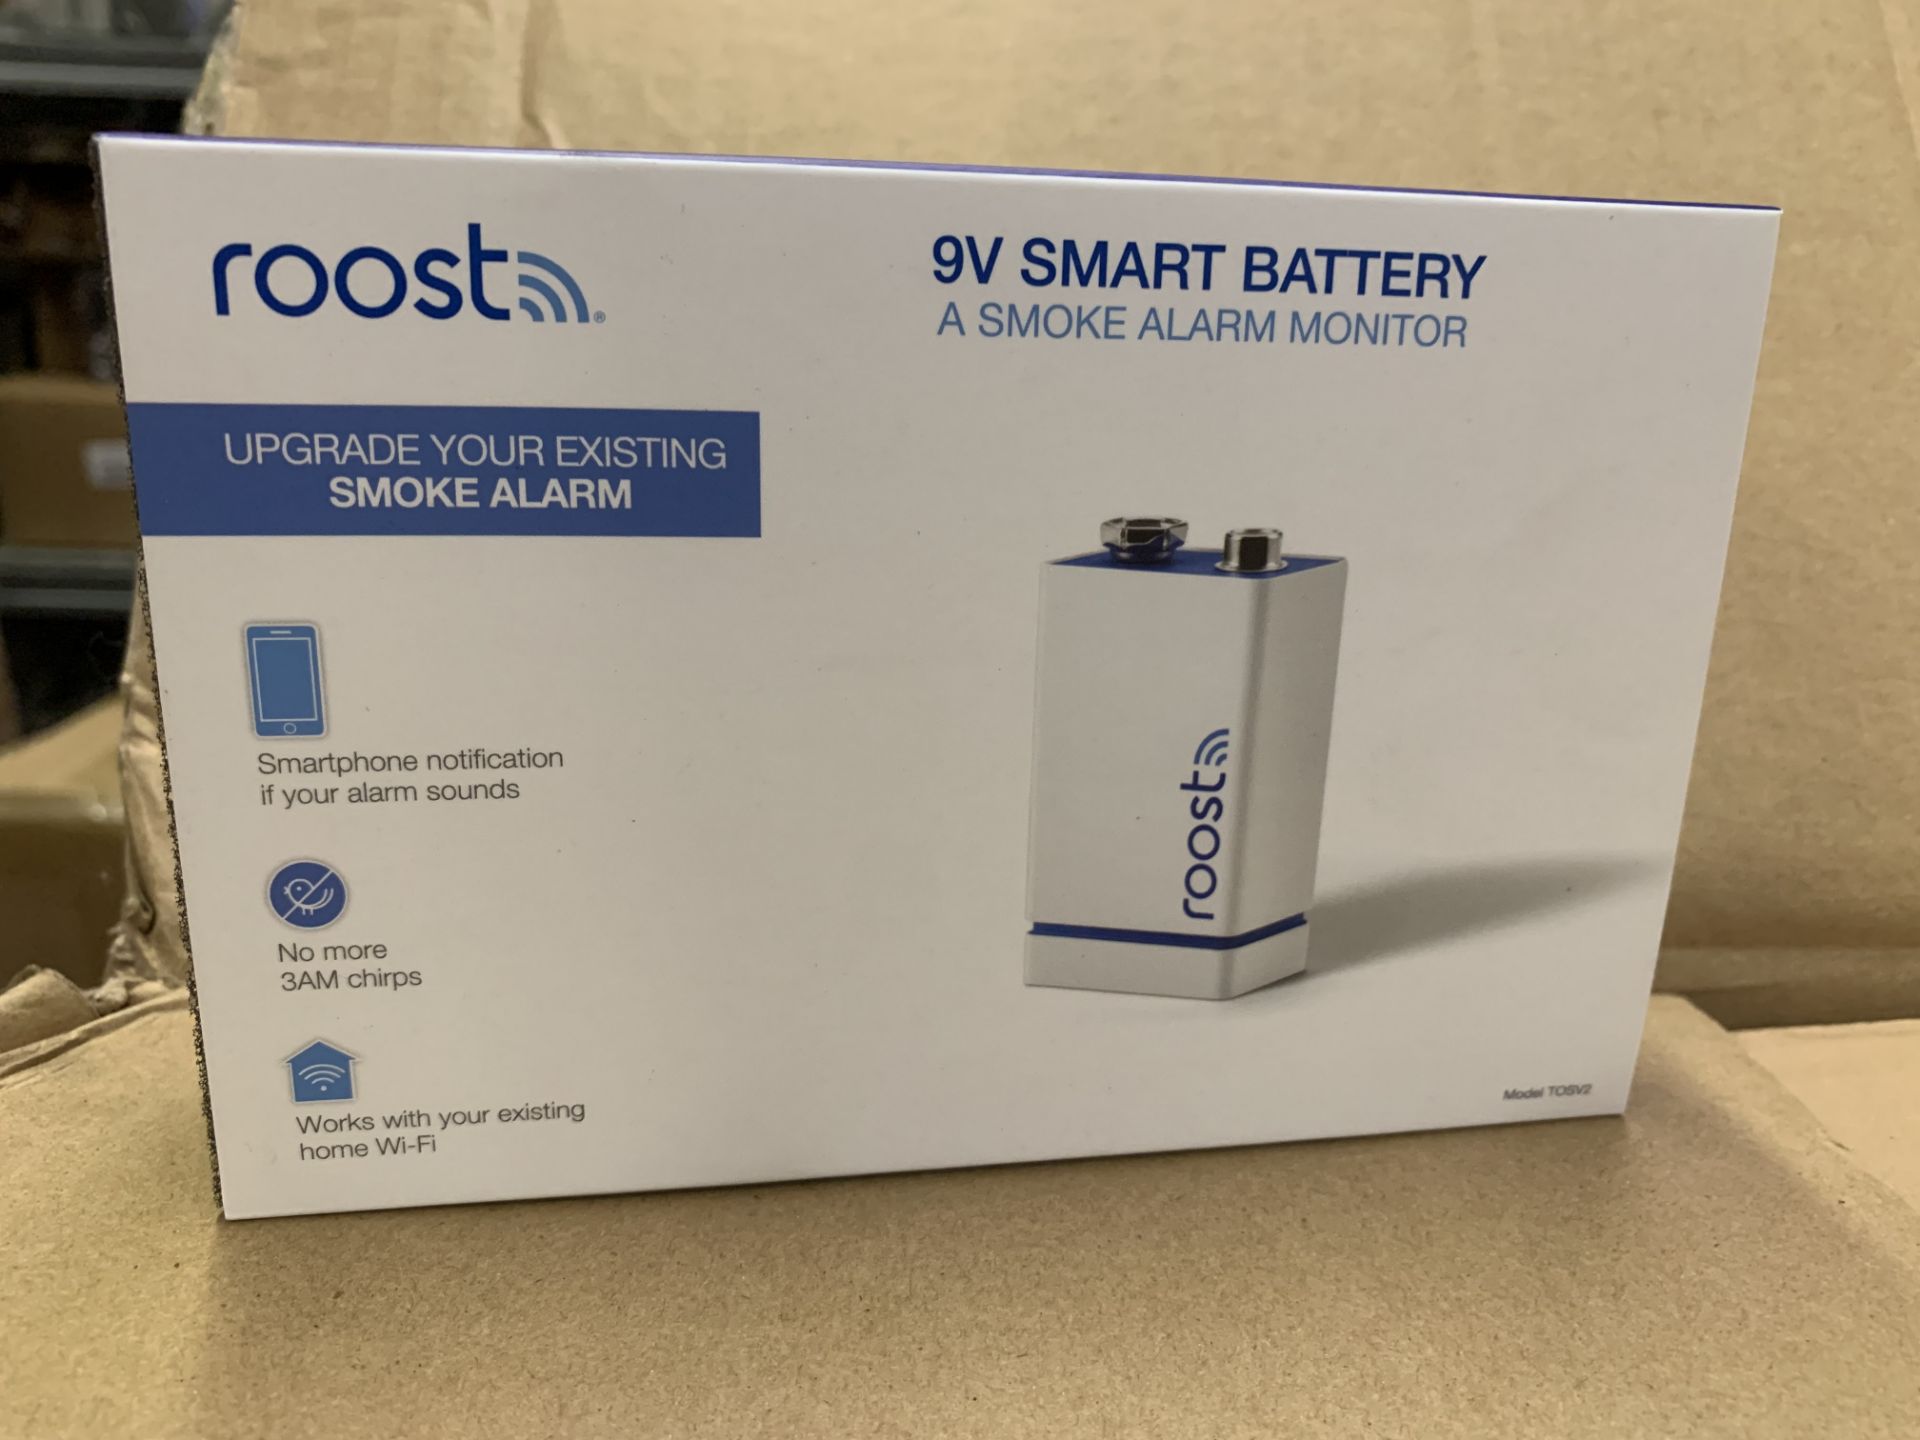 30 X BRAND NEW RETAIL PACKAGED ROOST 9V SMART BATTERY A SMOKE ALARM MONITOR